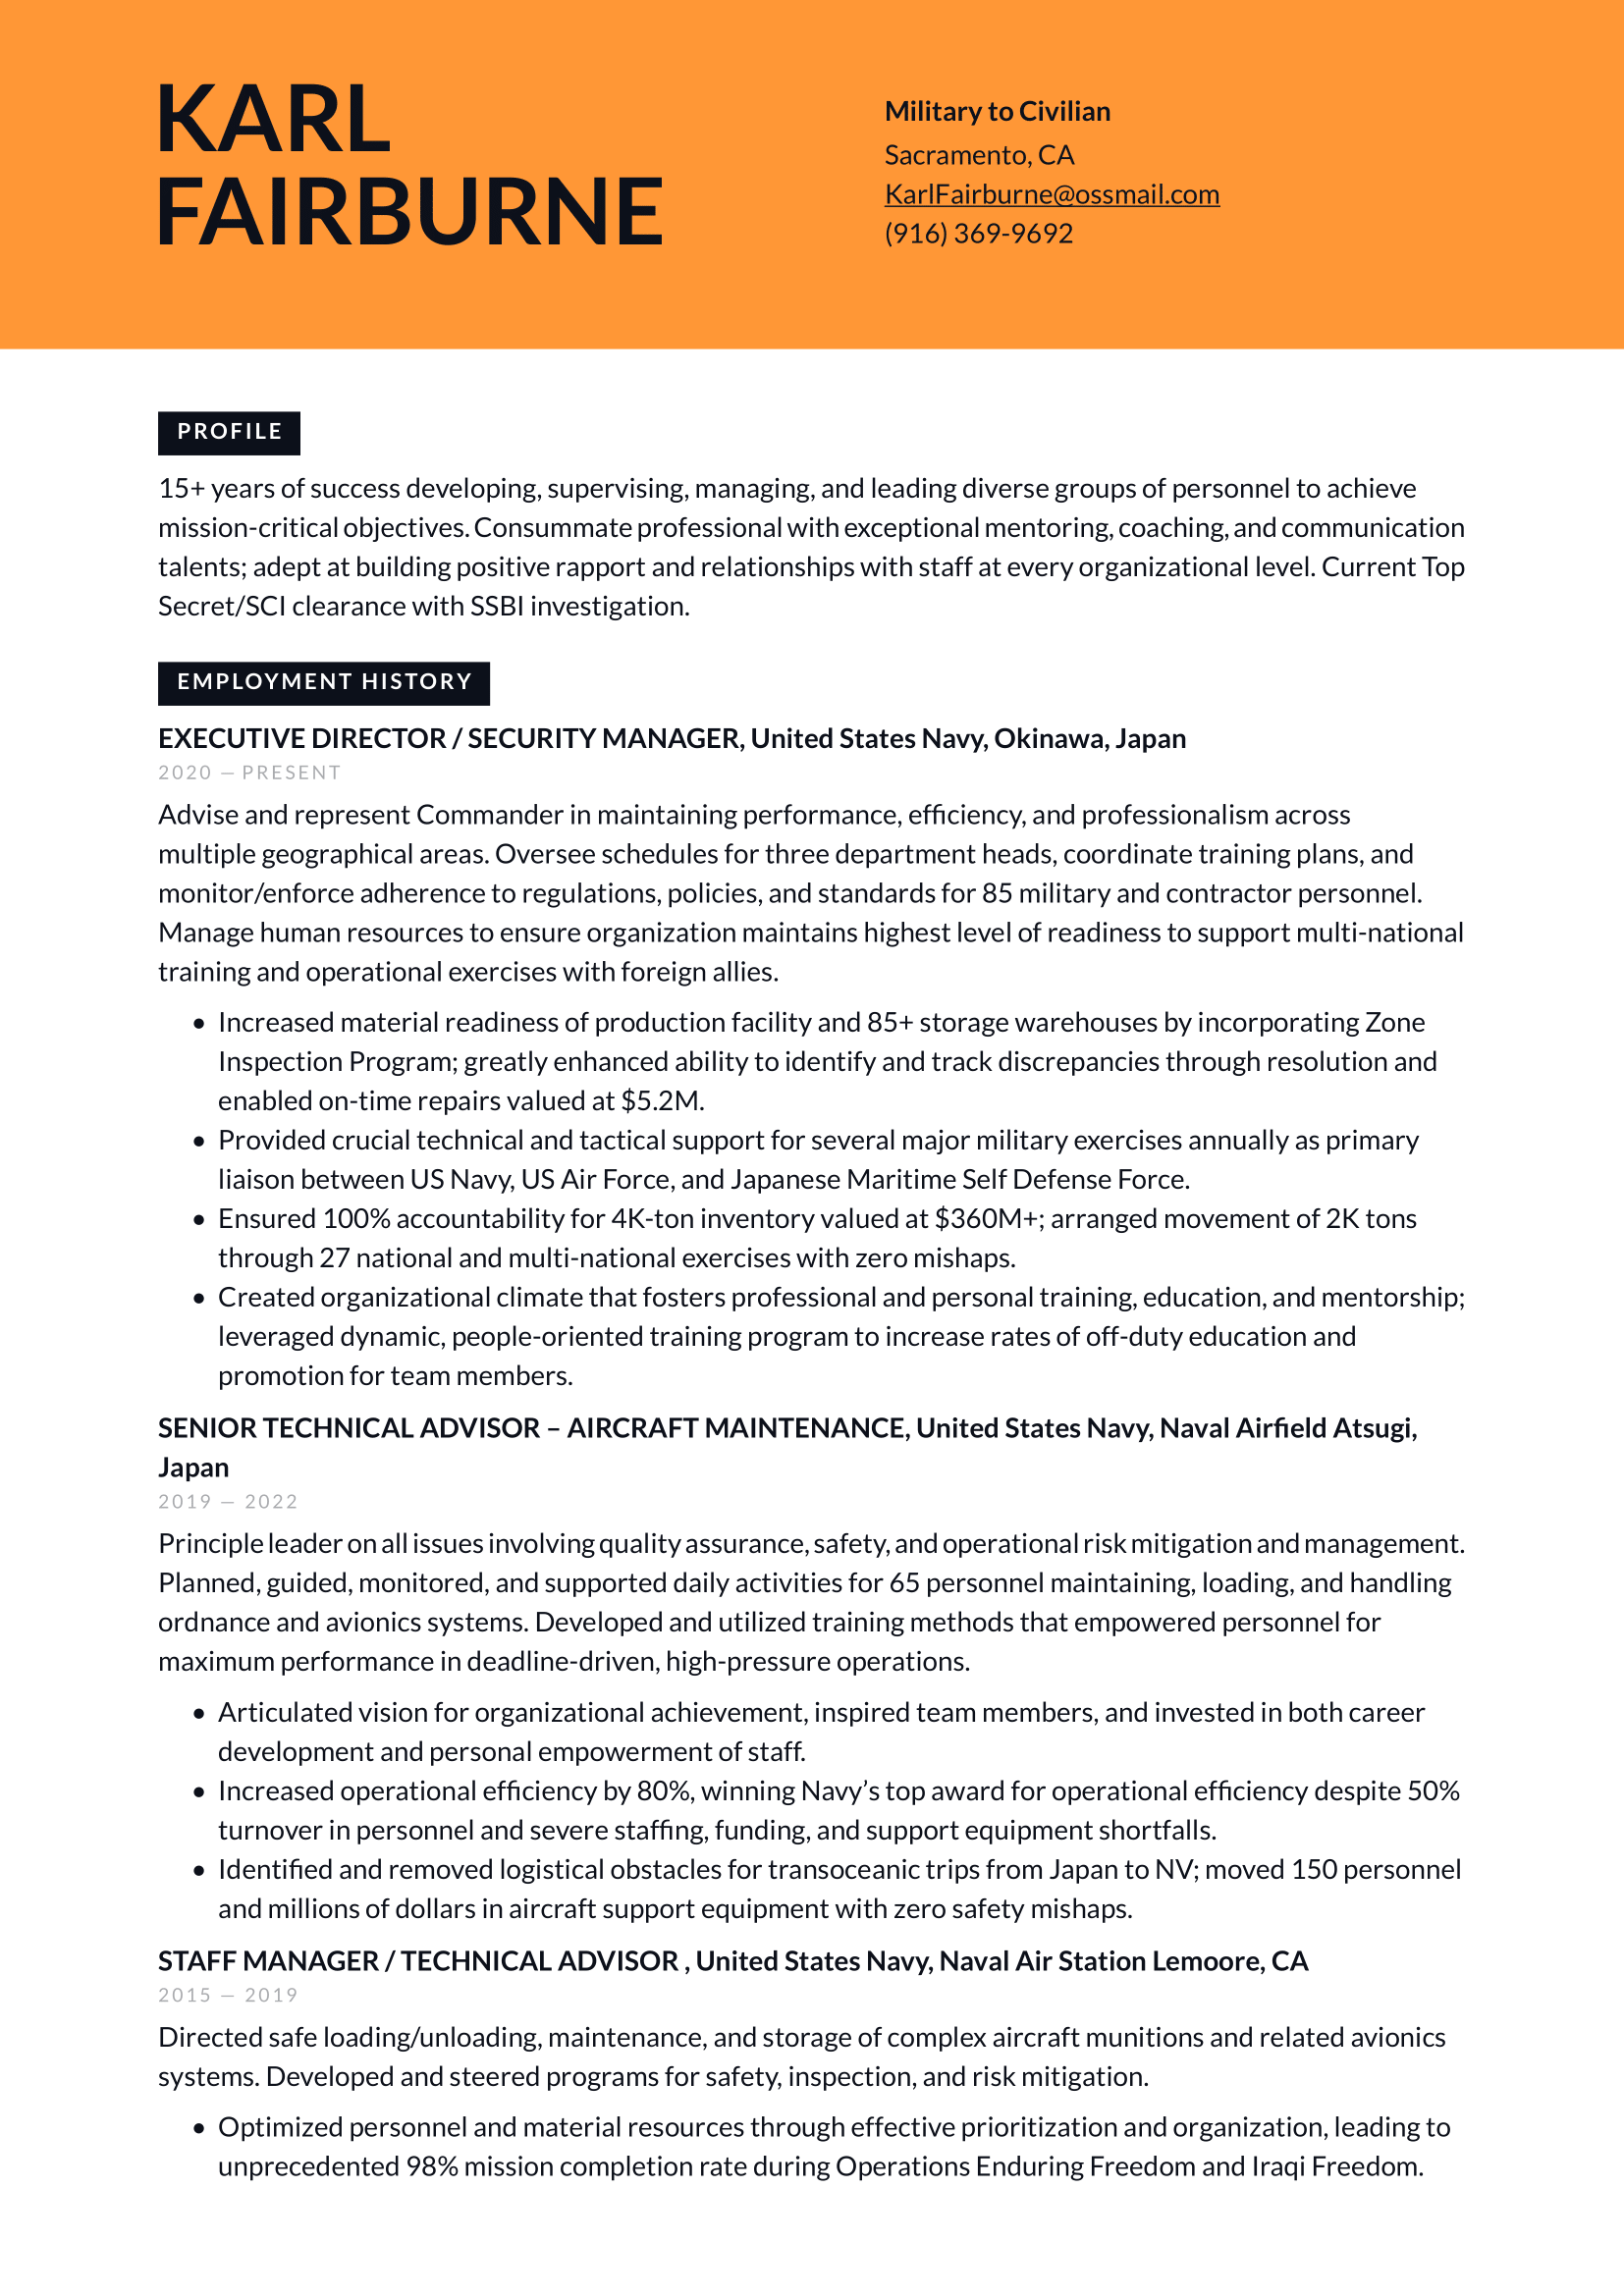 Military to Civilian Resume Example and Writing Guide